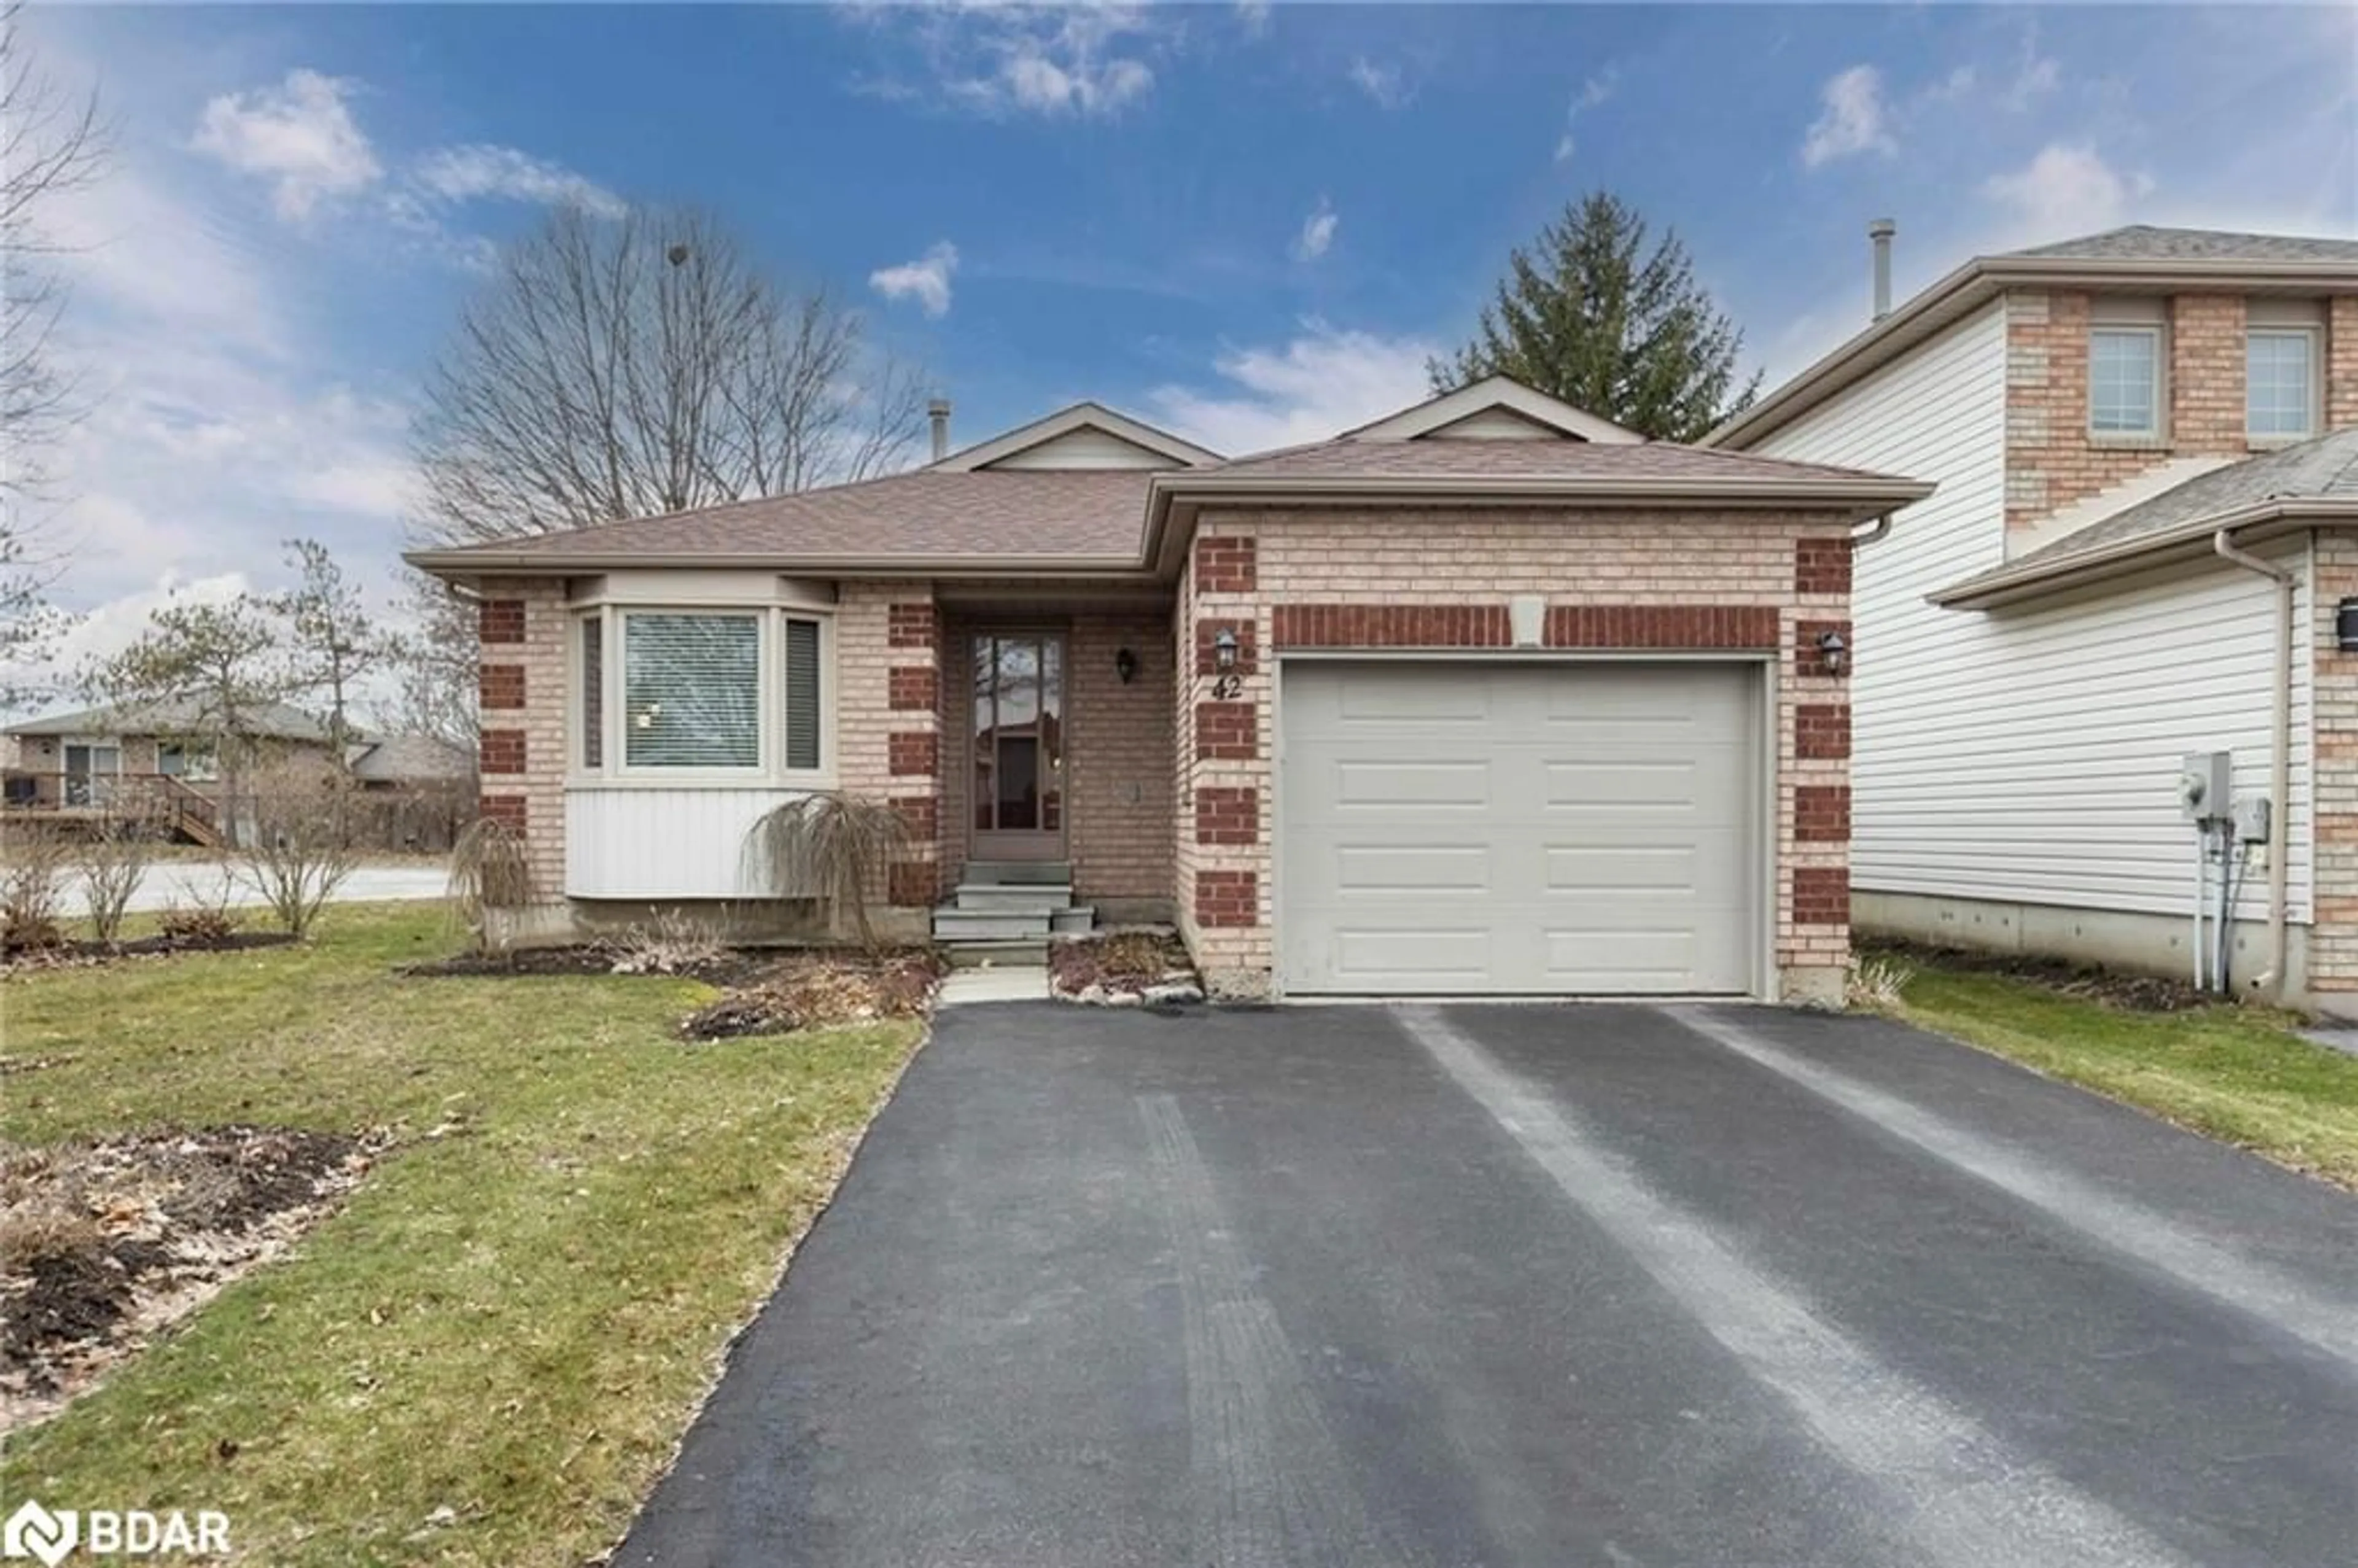 Frontside or backside of a home for 42 Assiniboine Dr, Barrie Ontario L4N 8G4